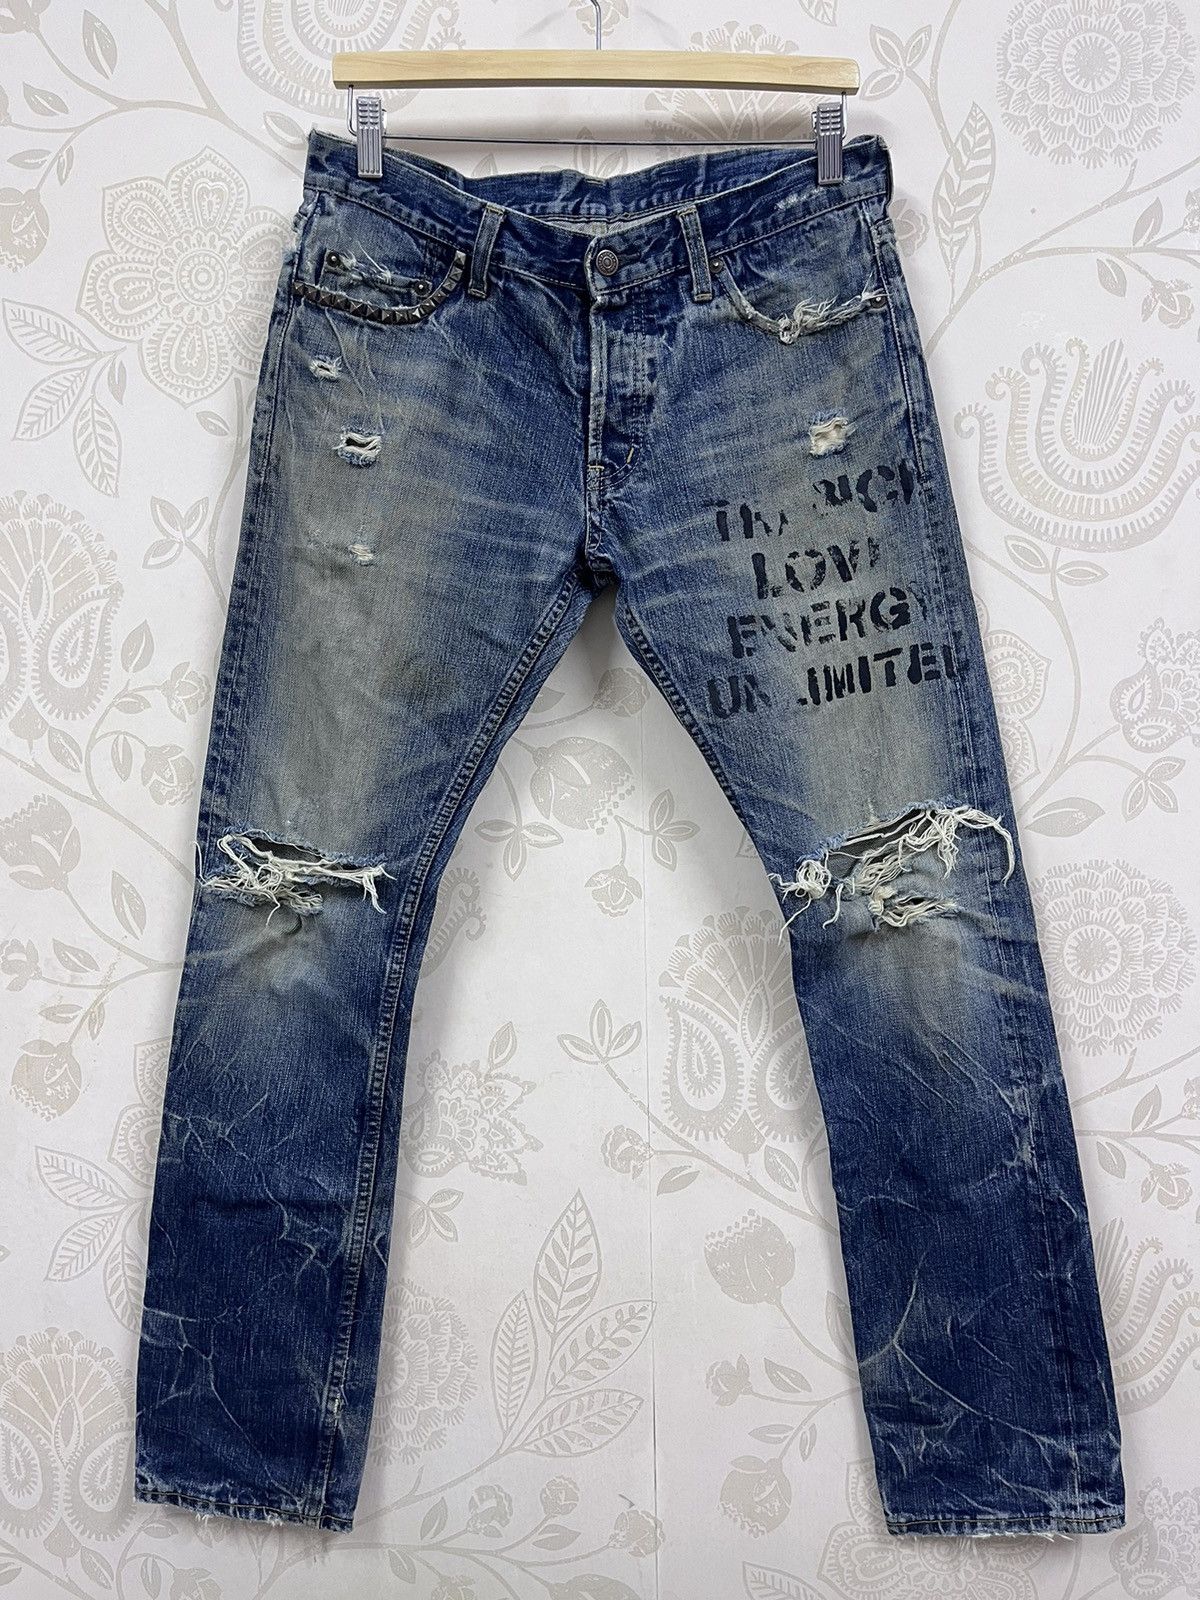 Vintage Hysteric Glamour Thee Hysteric XXX Distressed Denim - 1